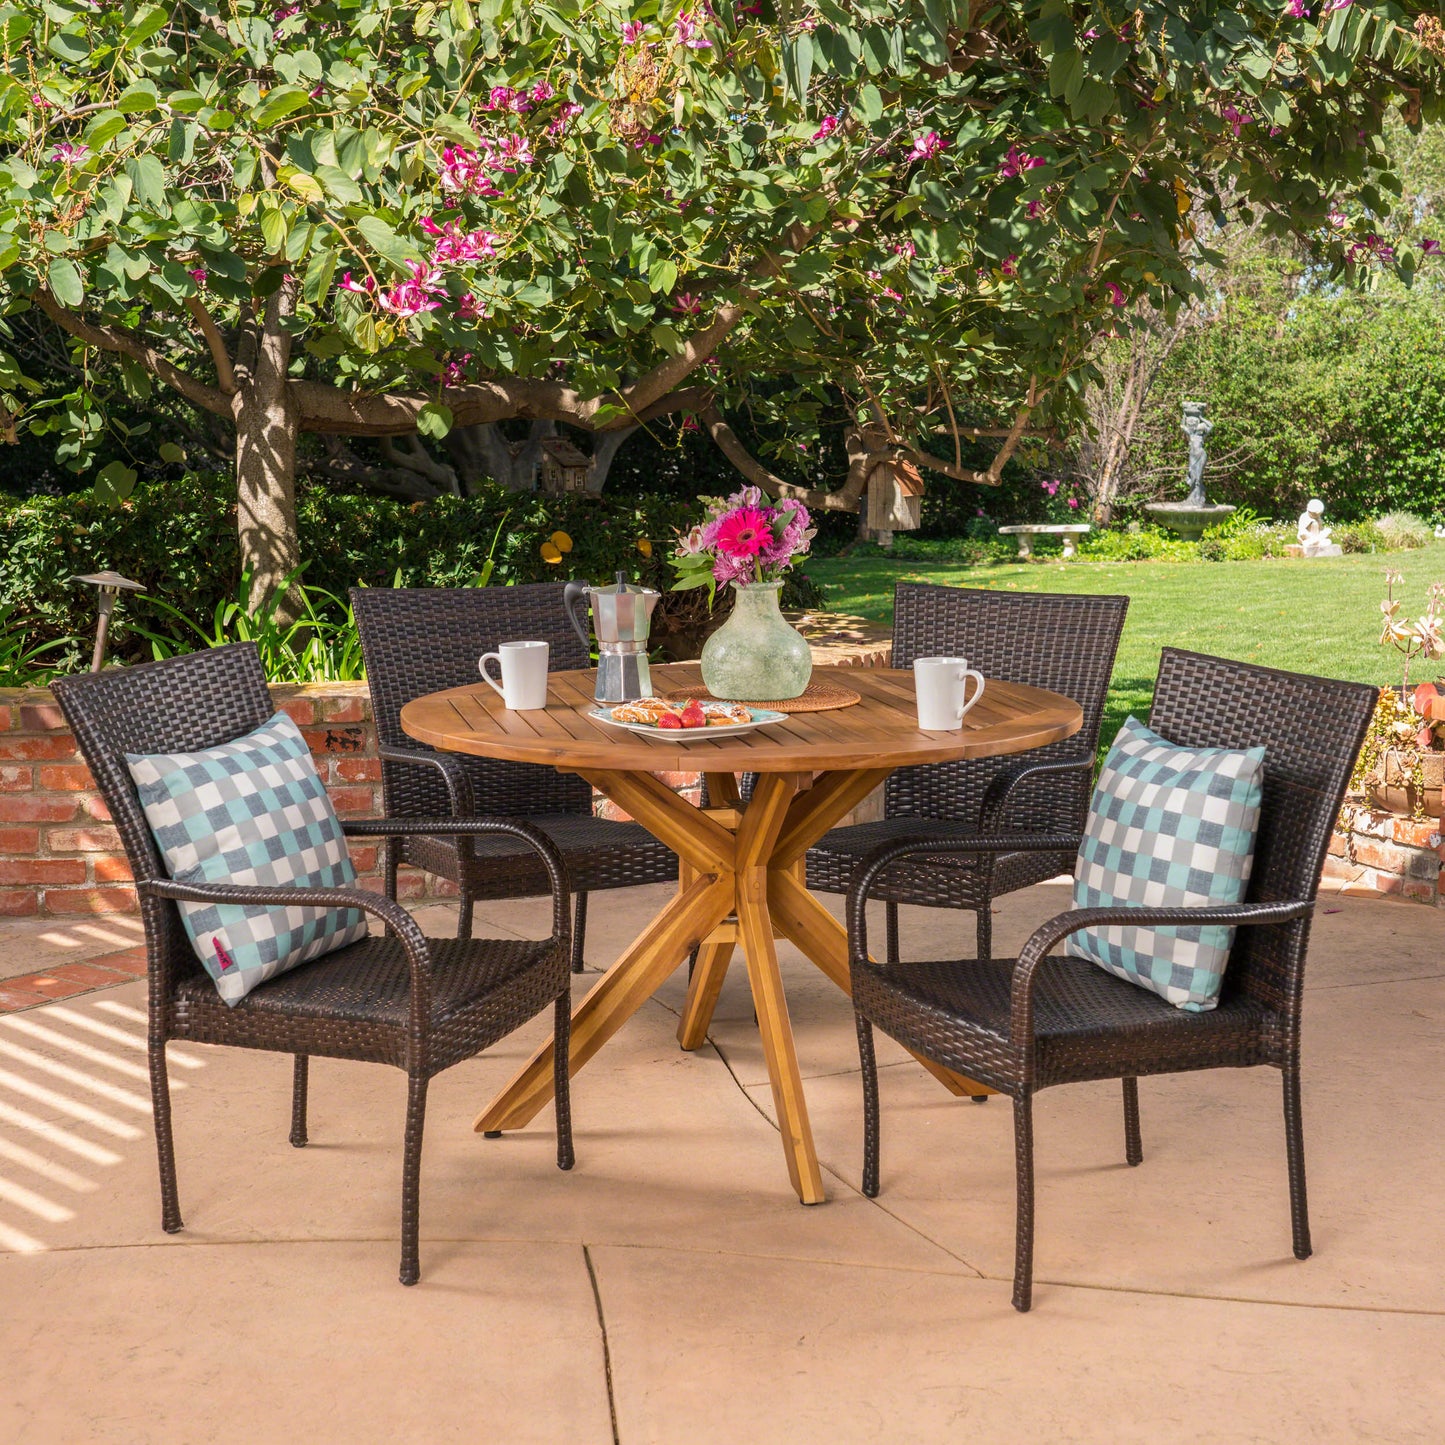 Avant Outdoor 5 Piece Multibrown Wicker Dining Set with Teak Finish Circular Acacia Wood Dining Table